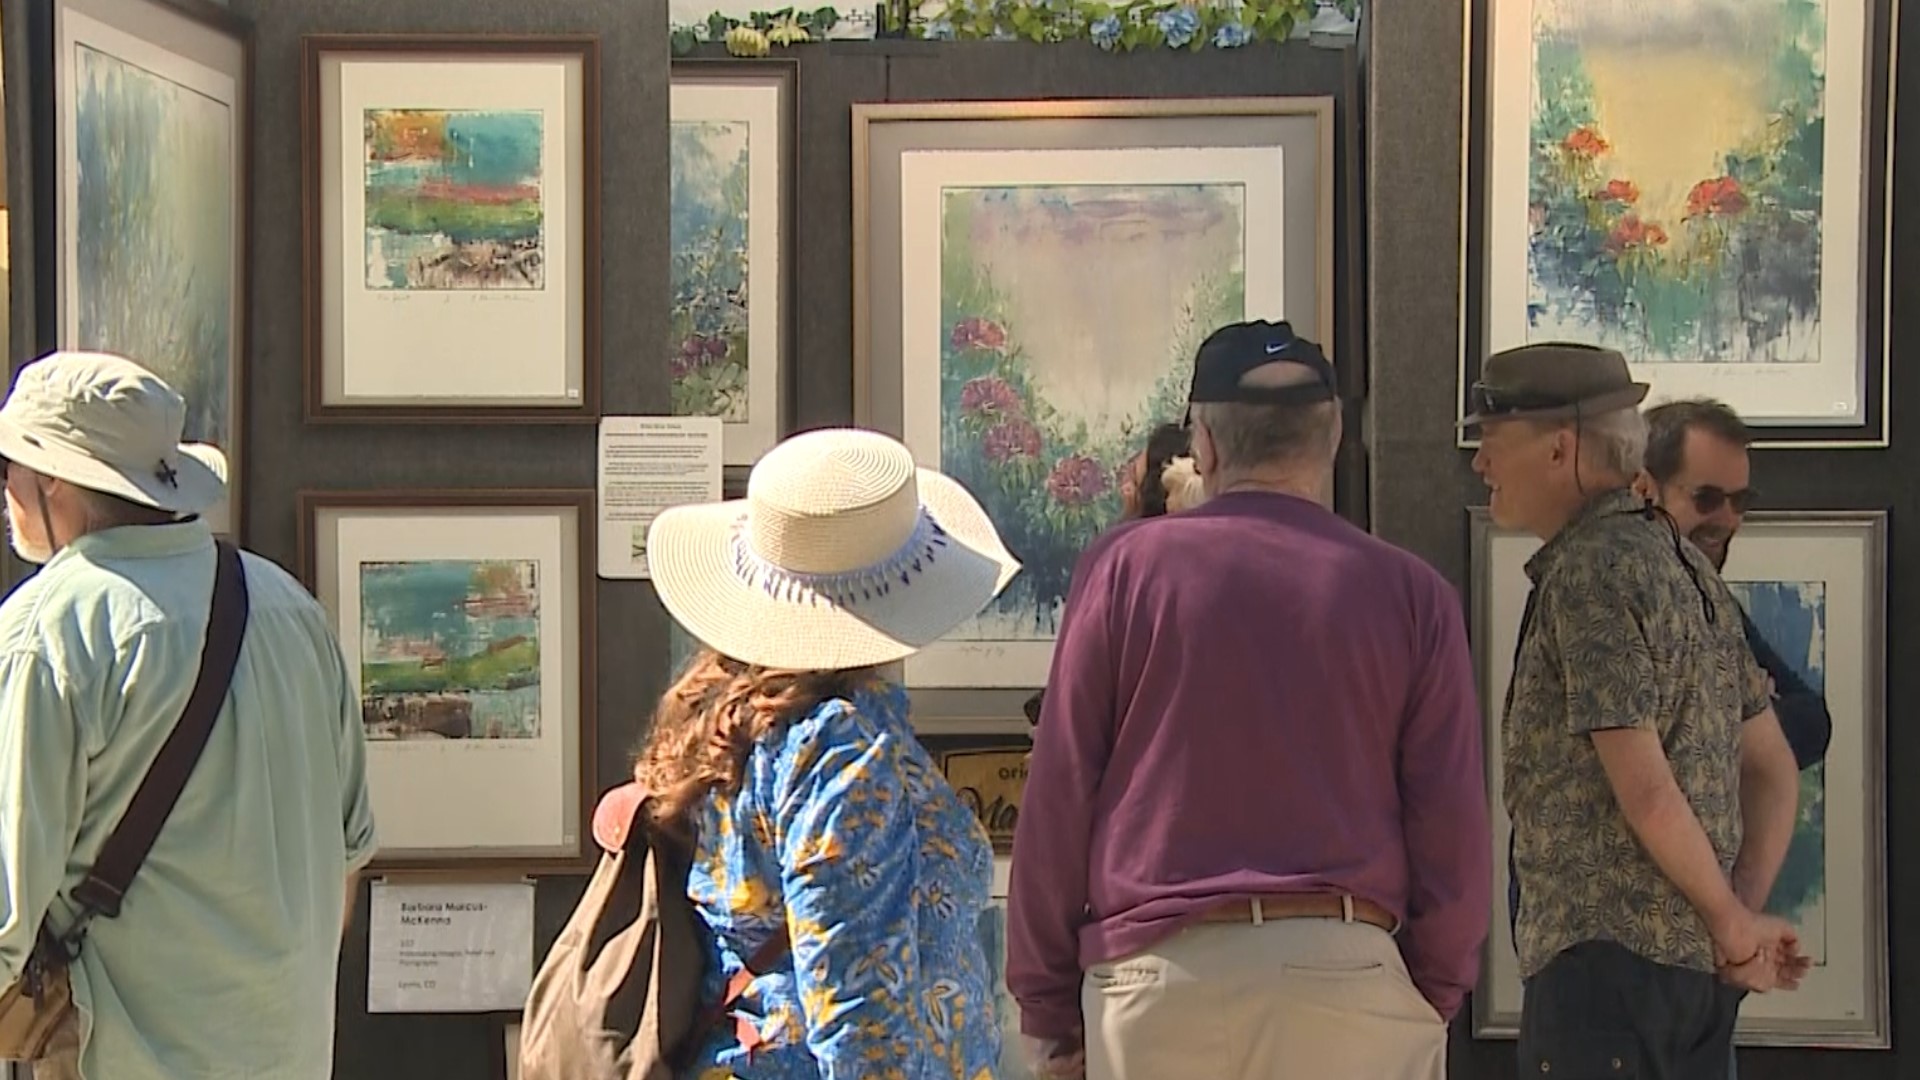 The event showcases more than 250 artists.